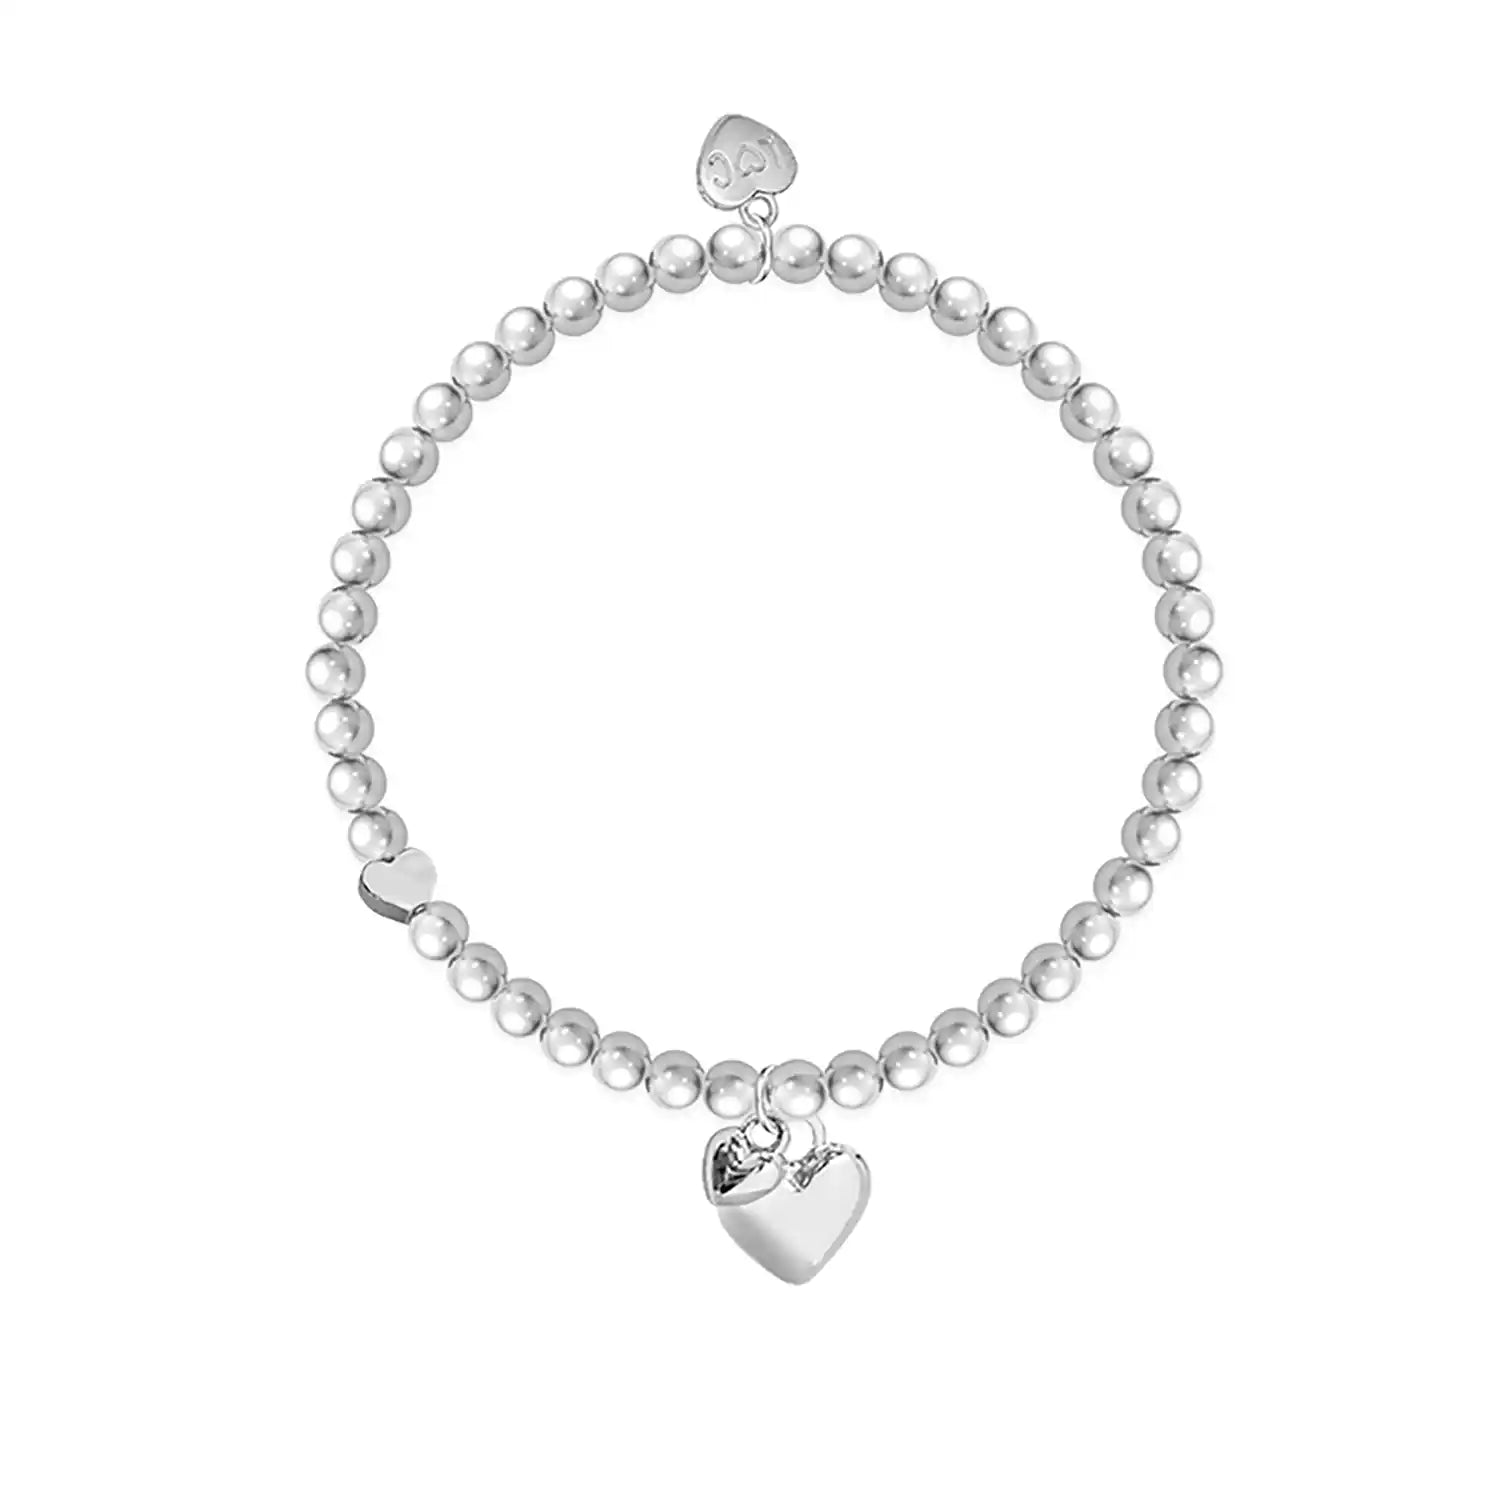 Life Charms Delightful Daughter Bracelet - Silver 1 Shaws Department Stores